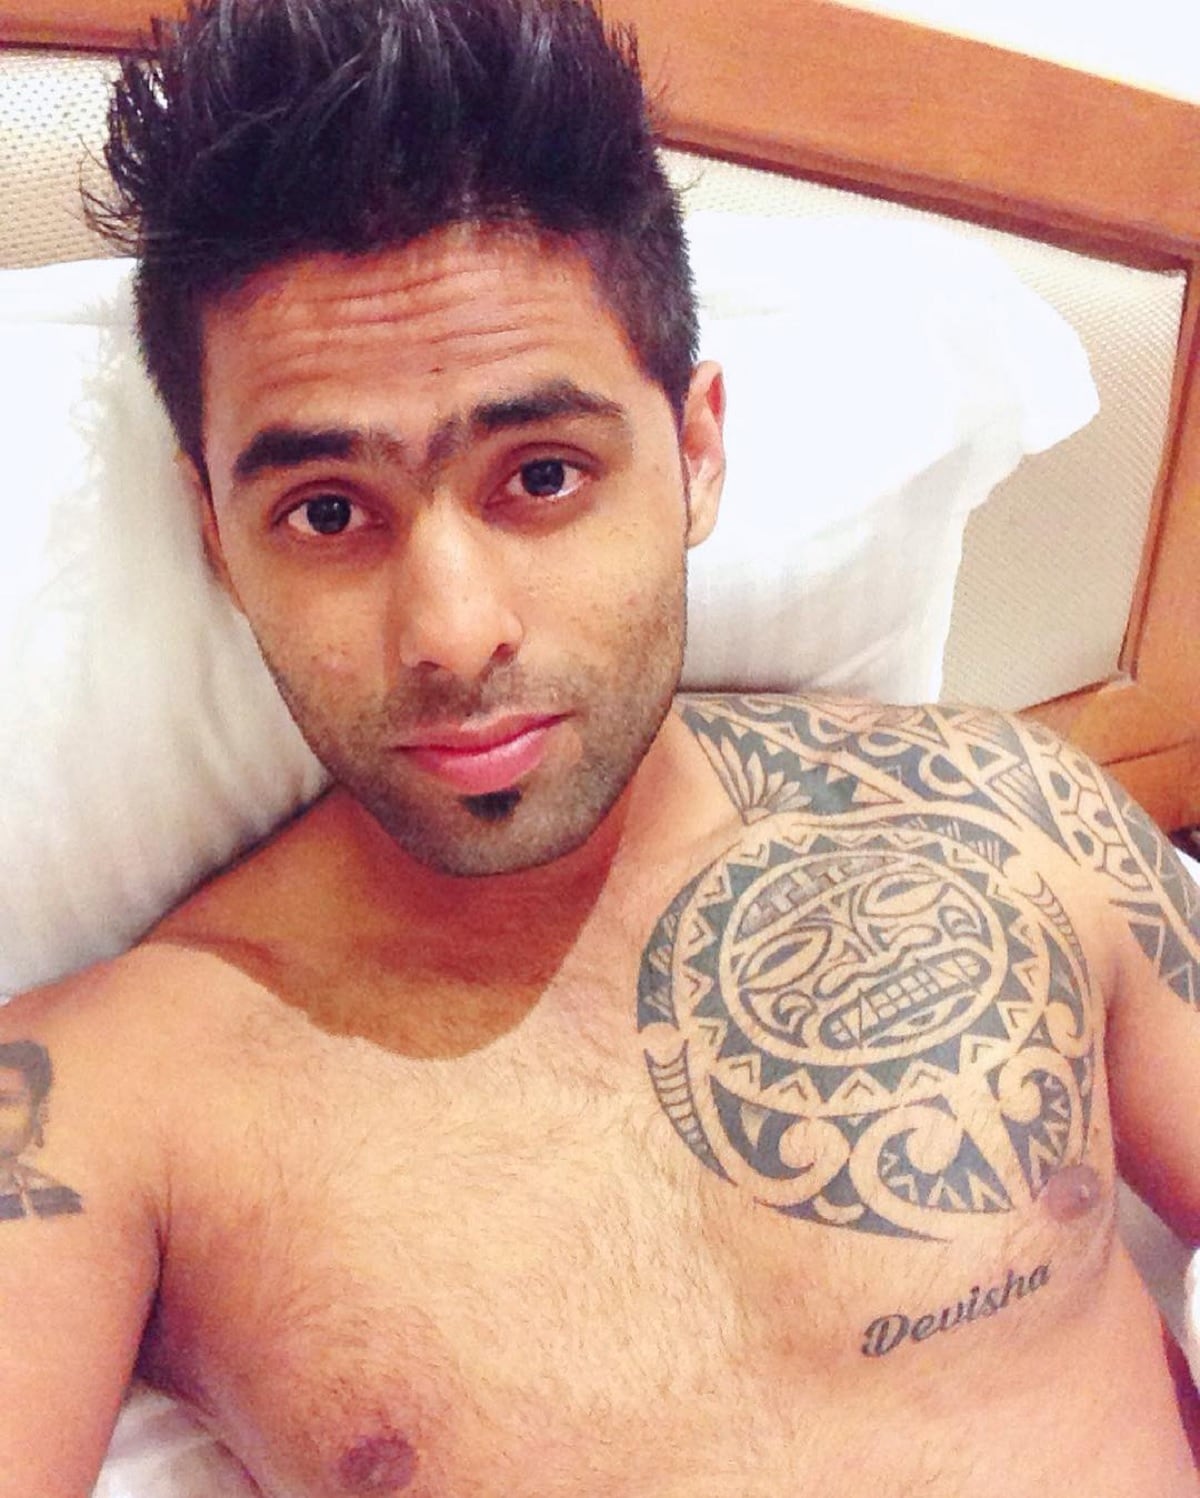 23 South Indian Actors Who've Got Some Really Cool Tattoos - Wirally